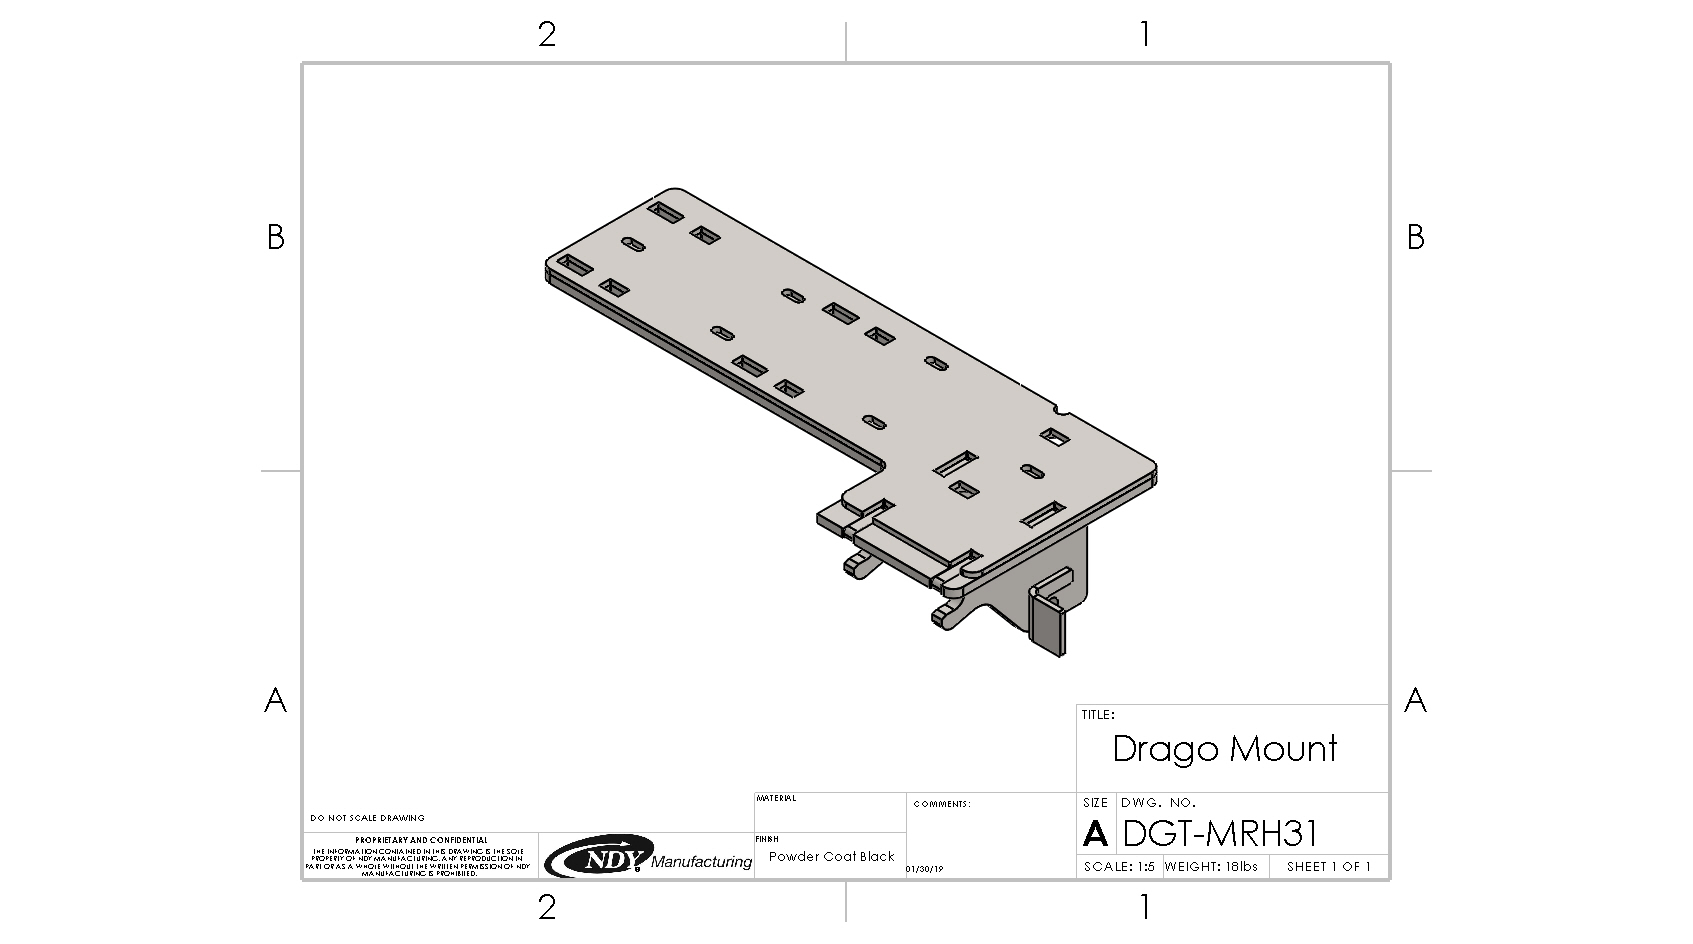 A drawing of a Stalk Stomper Mount for Drago GT - Right for a device.